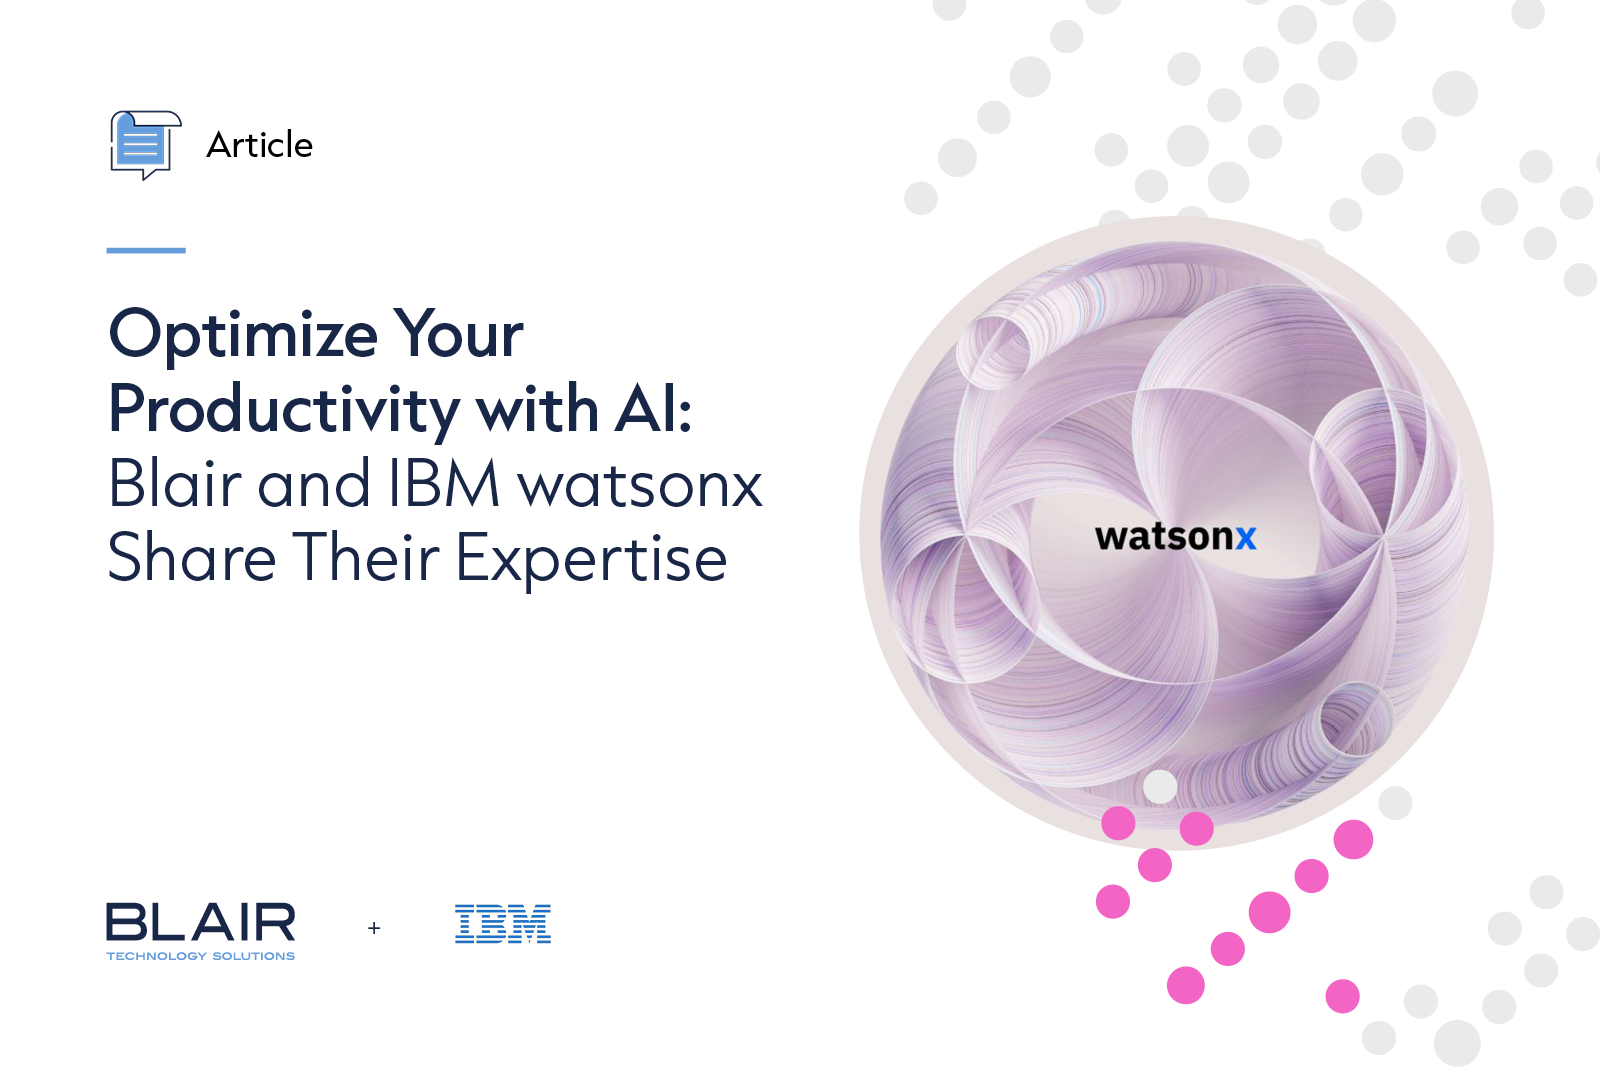 Optimize Your Productivity with AI: Blair and IBM watsonx Share Their Expertise